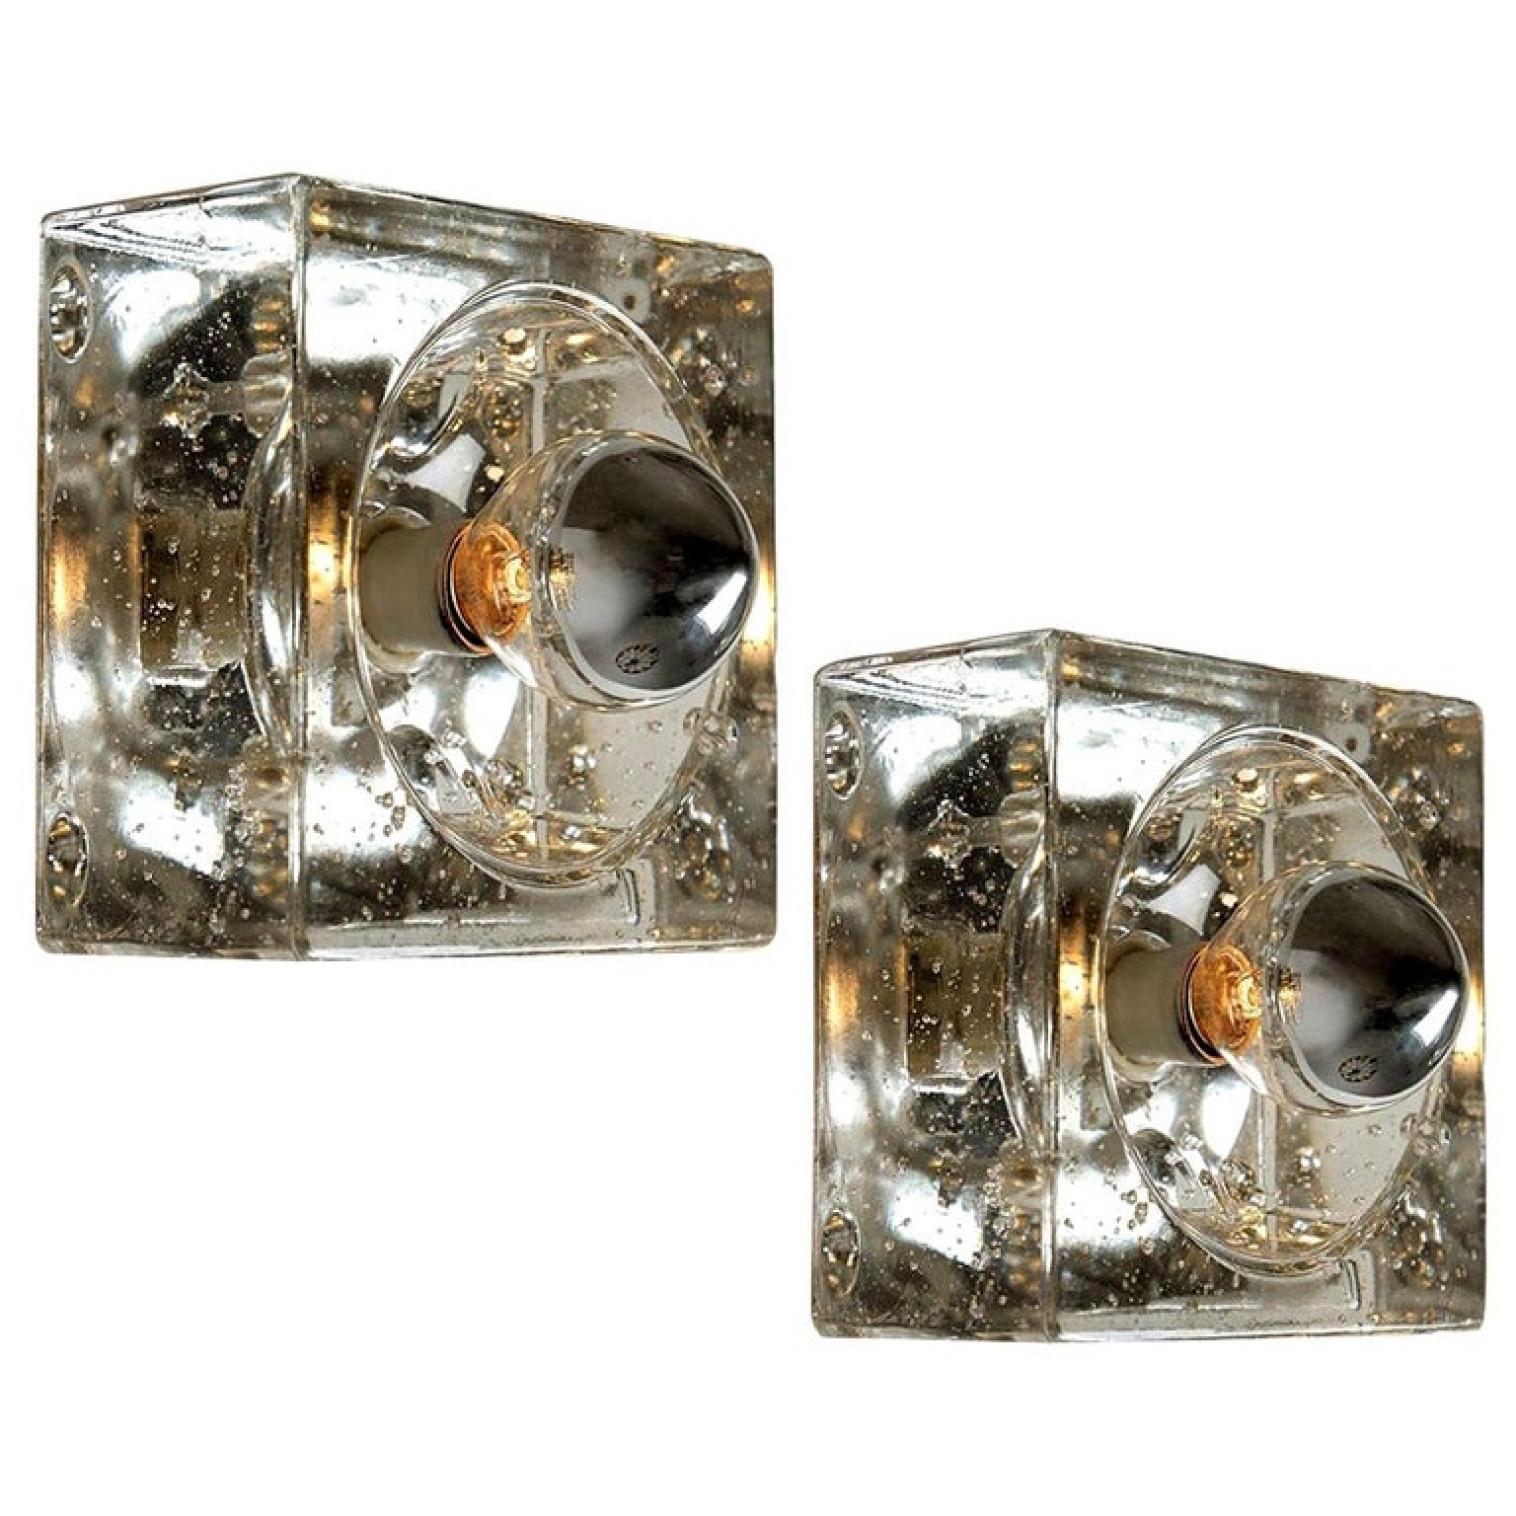 This lights are made from thick hand blown glass on a square silver colored backplate. The glass causes a nice lighting effect on the ceiling or wall. Each lamp has one E14 fitting (Max 25 Watt)

Can work for impressive wall or ceiling lights.
We